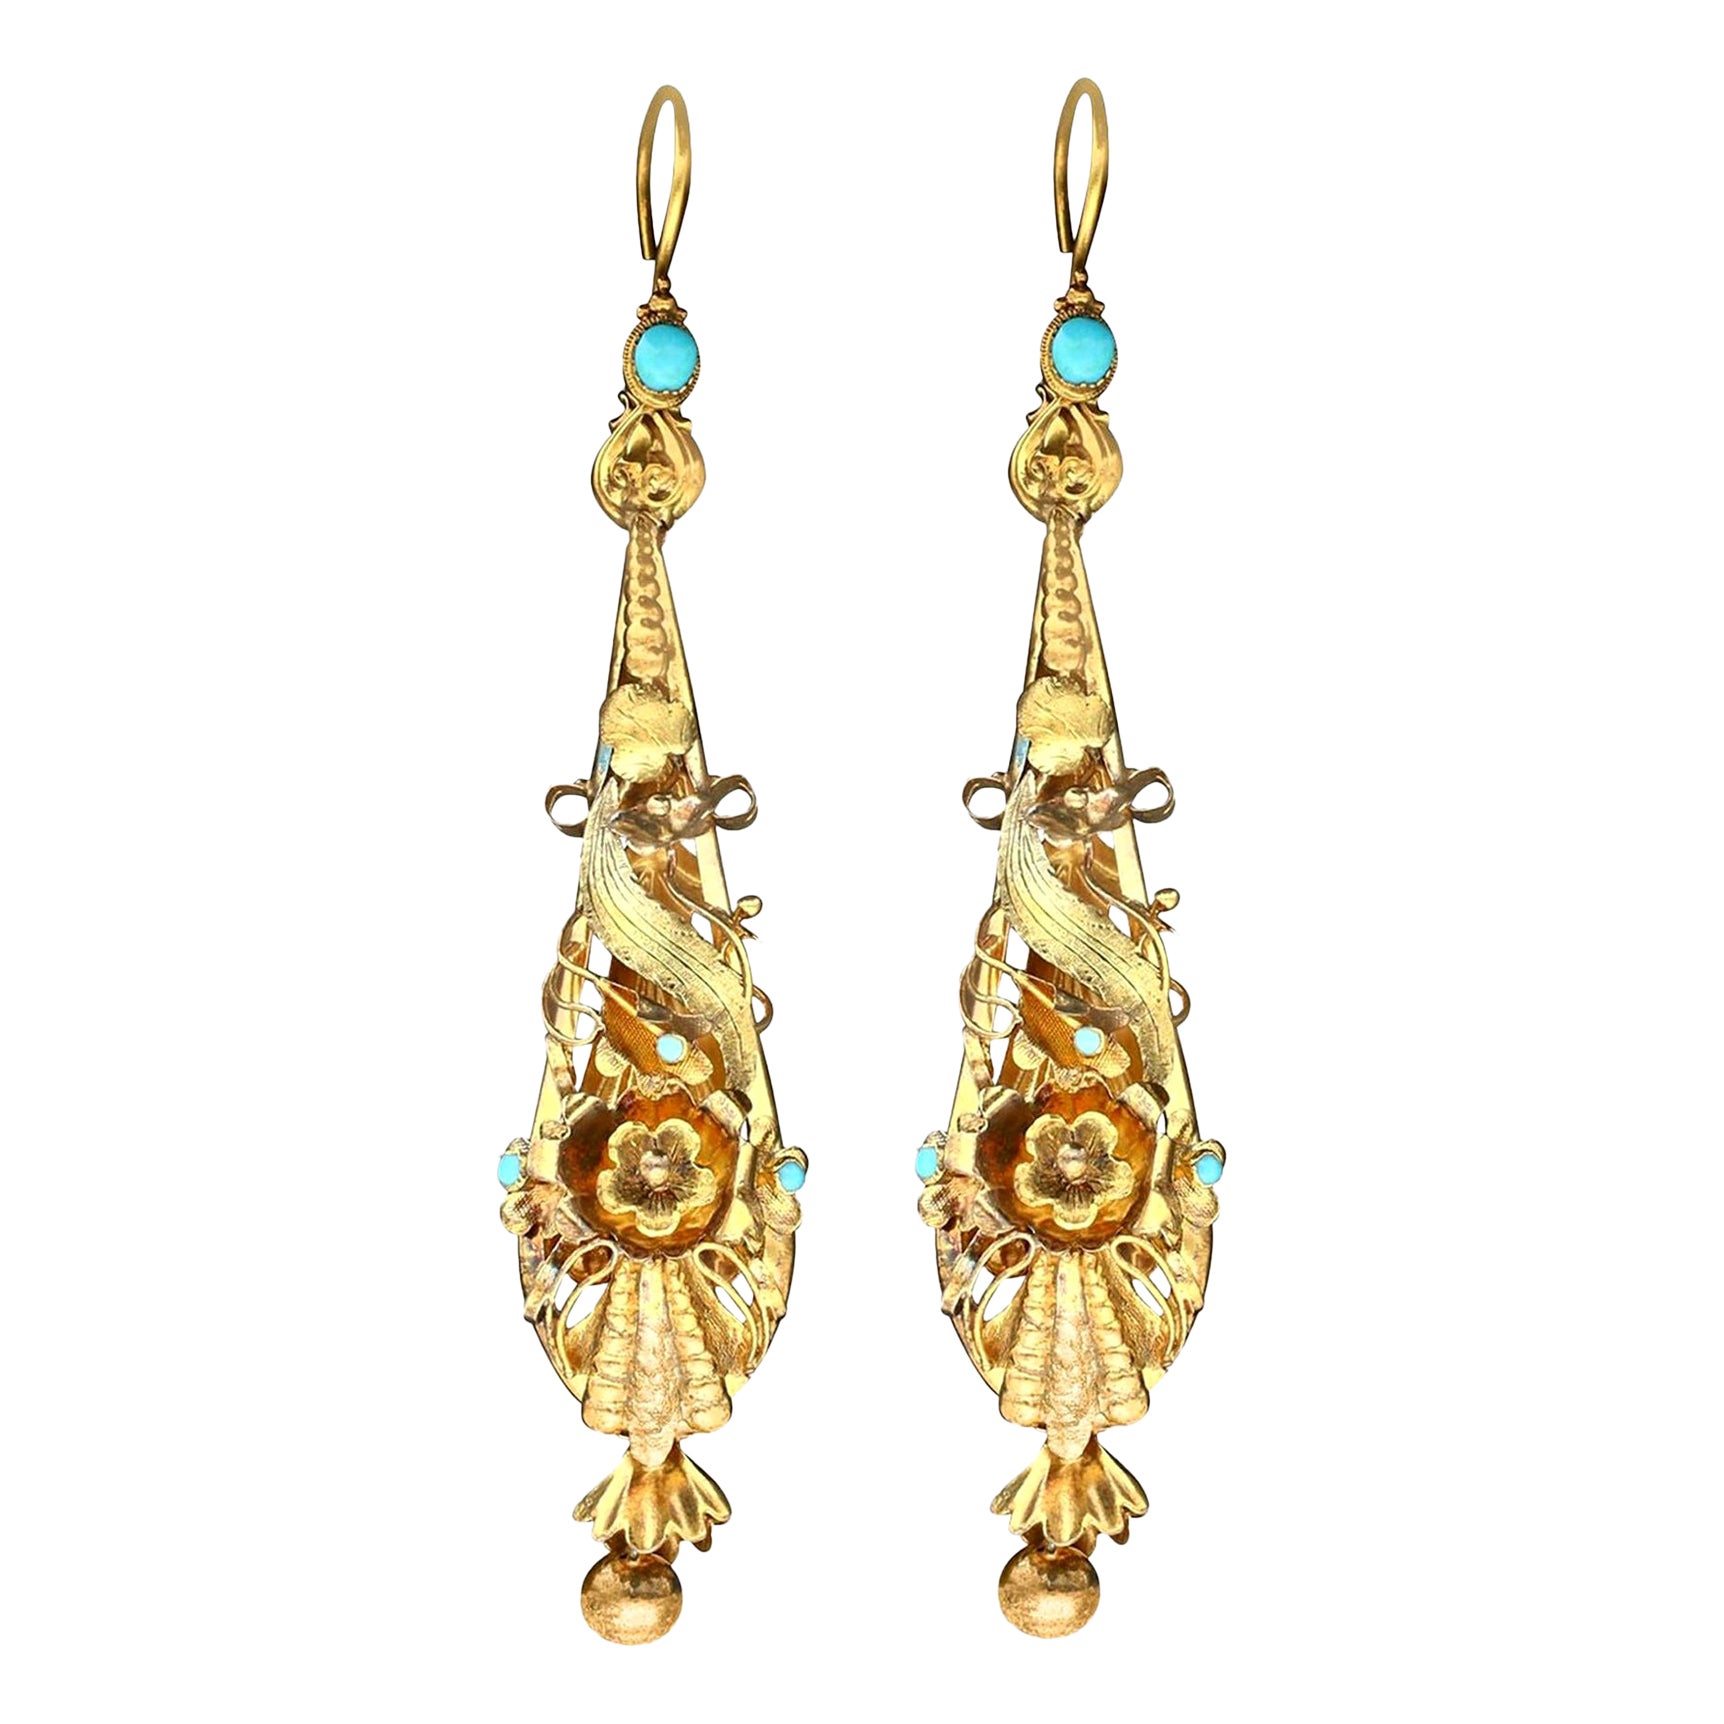 Antique 0.45 Carat Turquoise and Yellow Gold Earrings